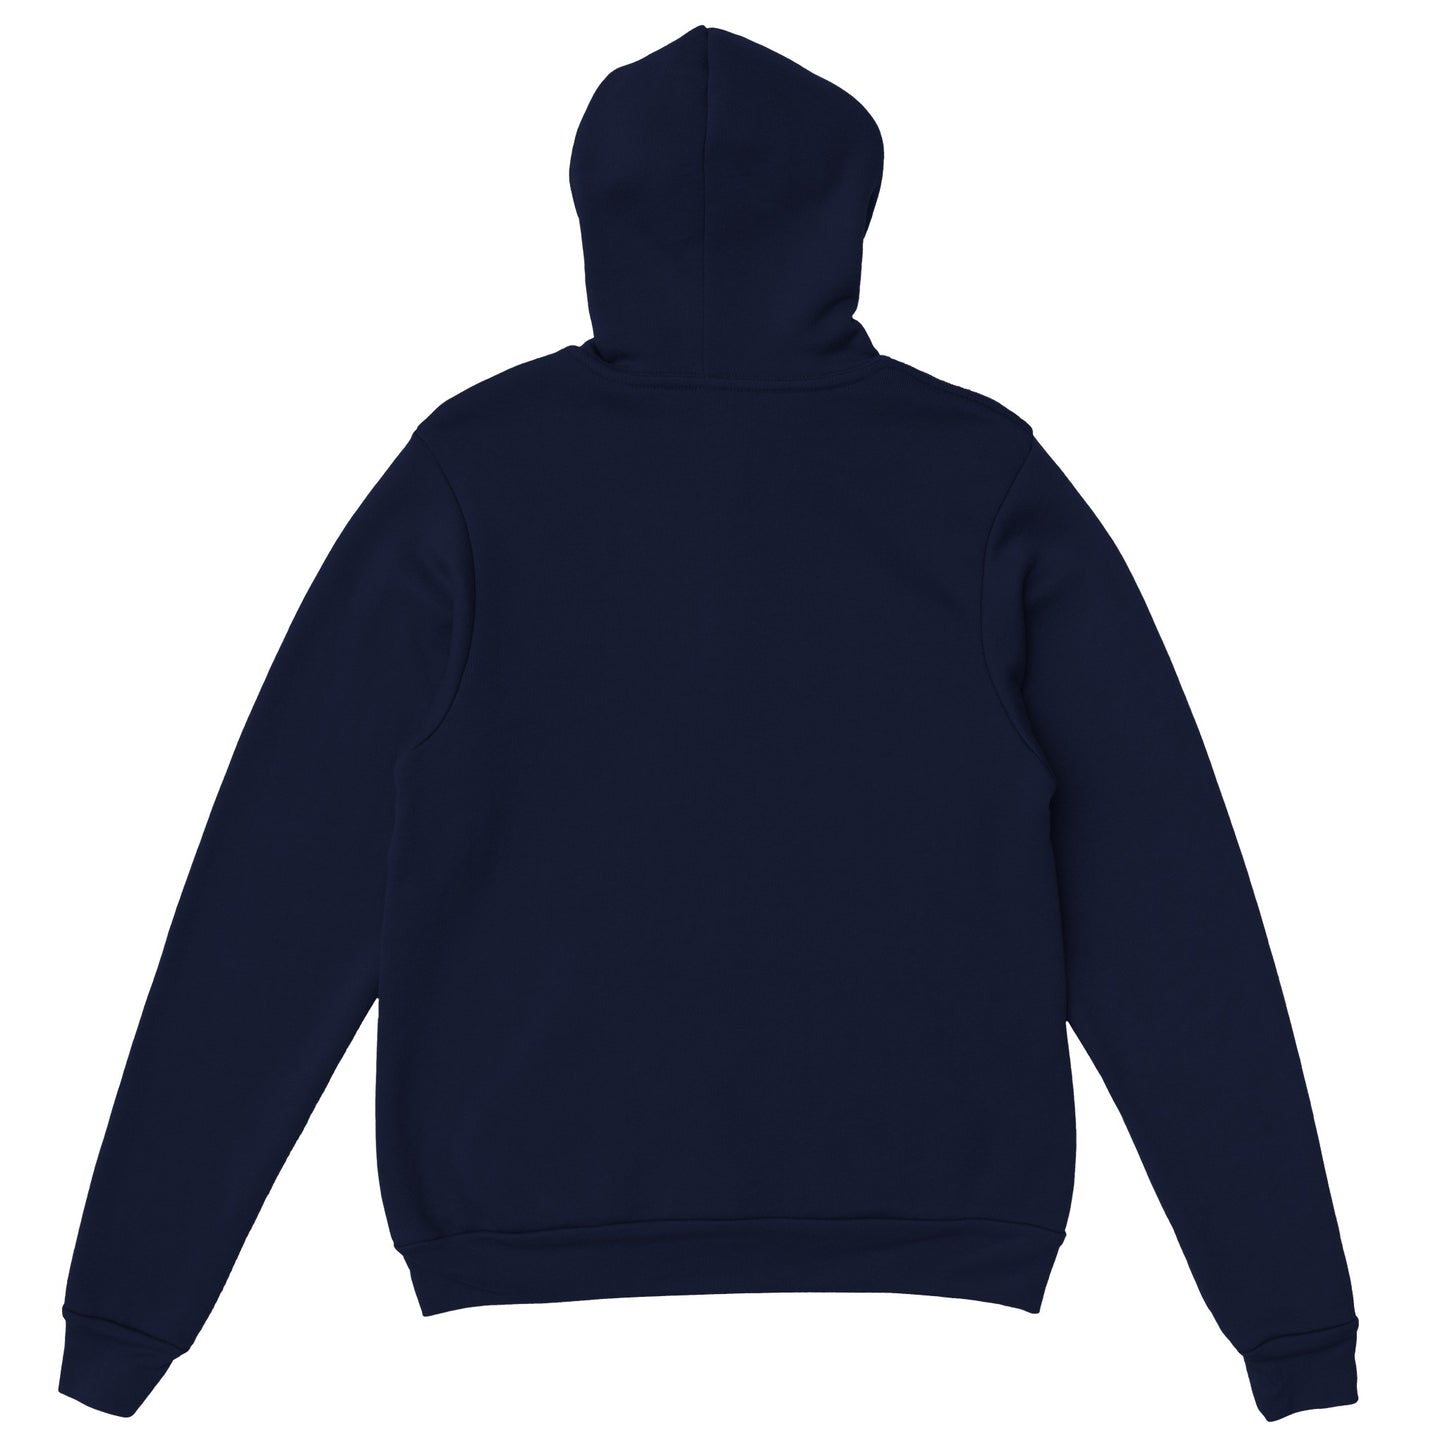 Hoodie I love "Texte Personnalisable"